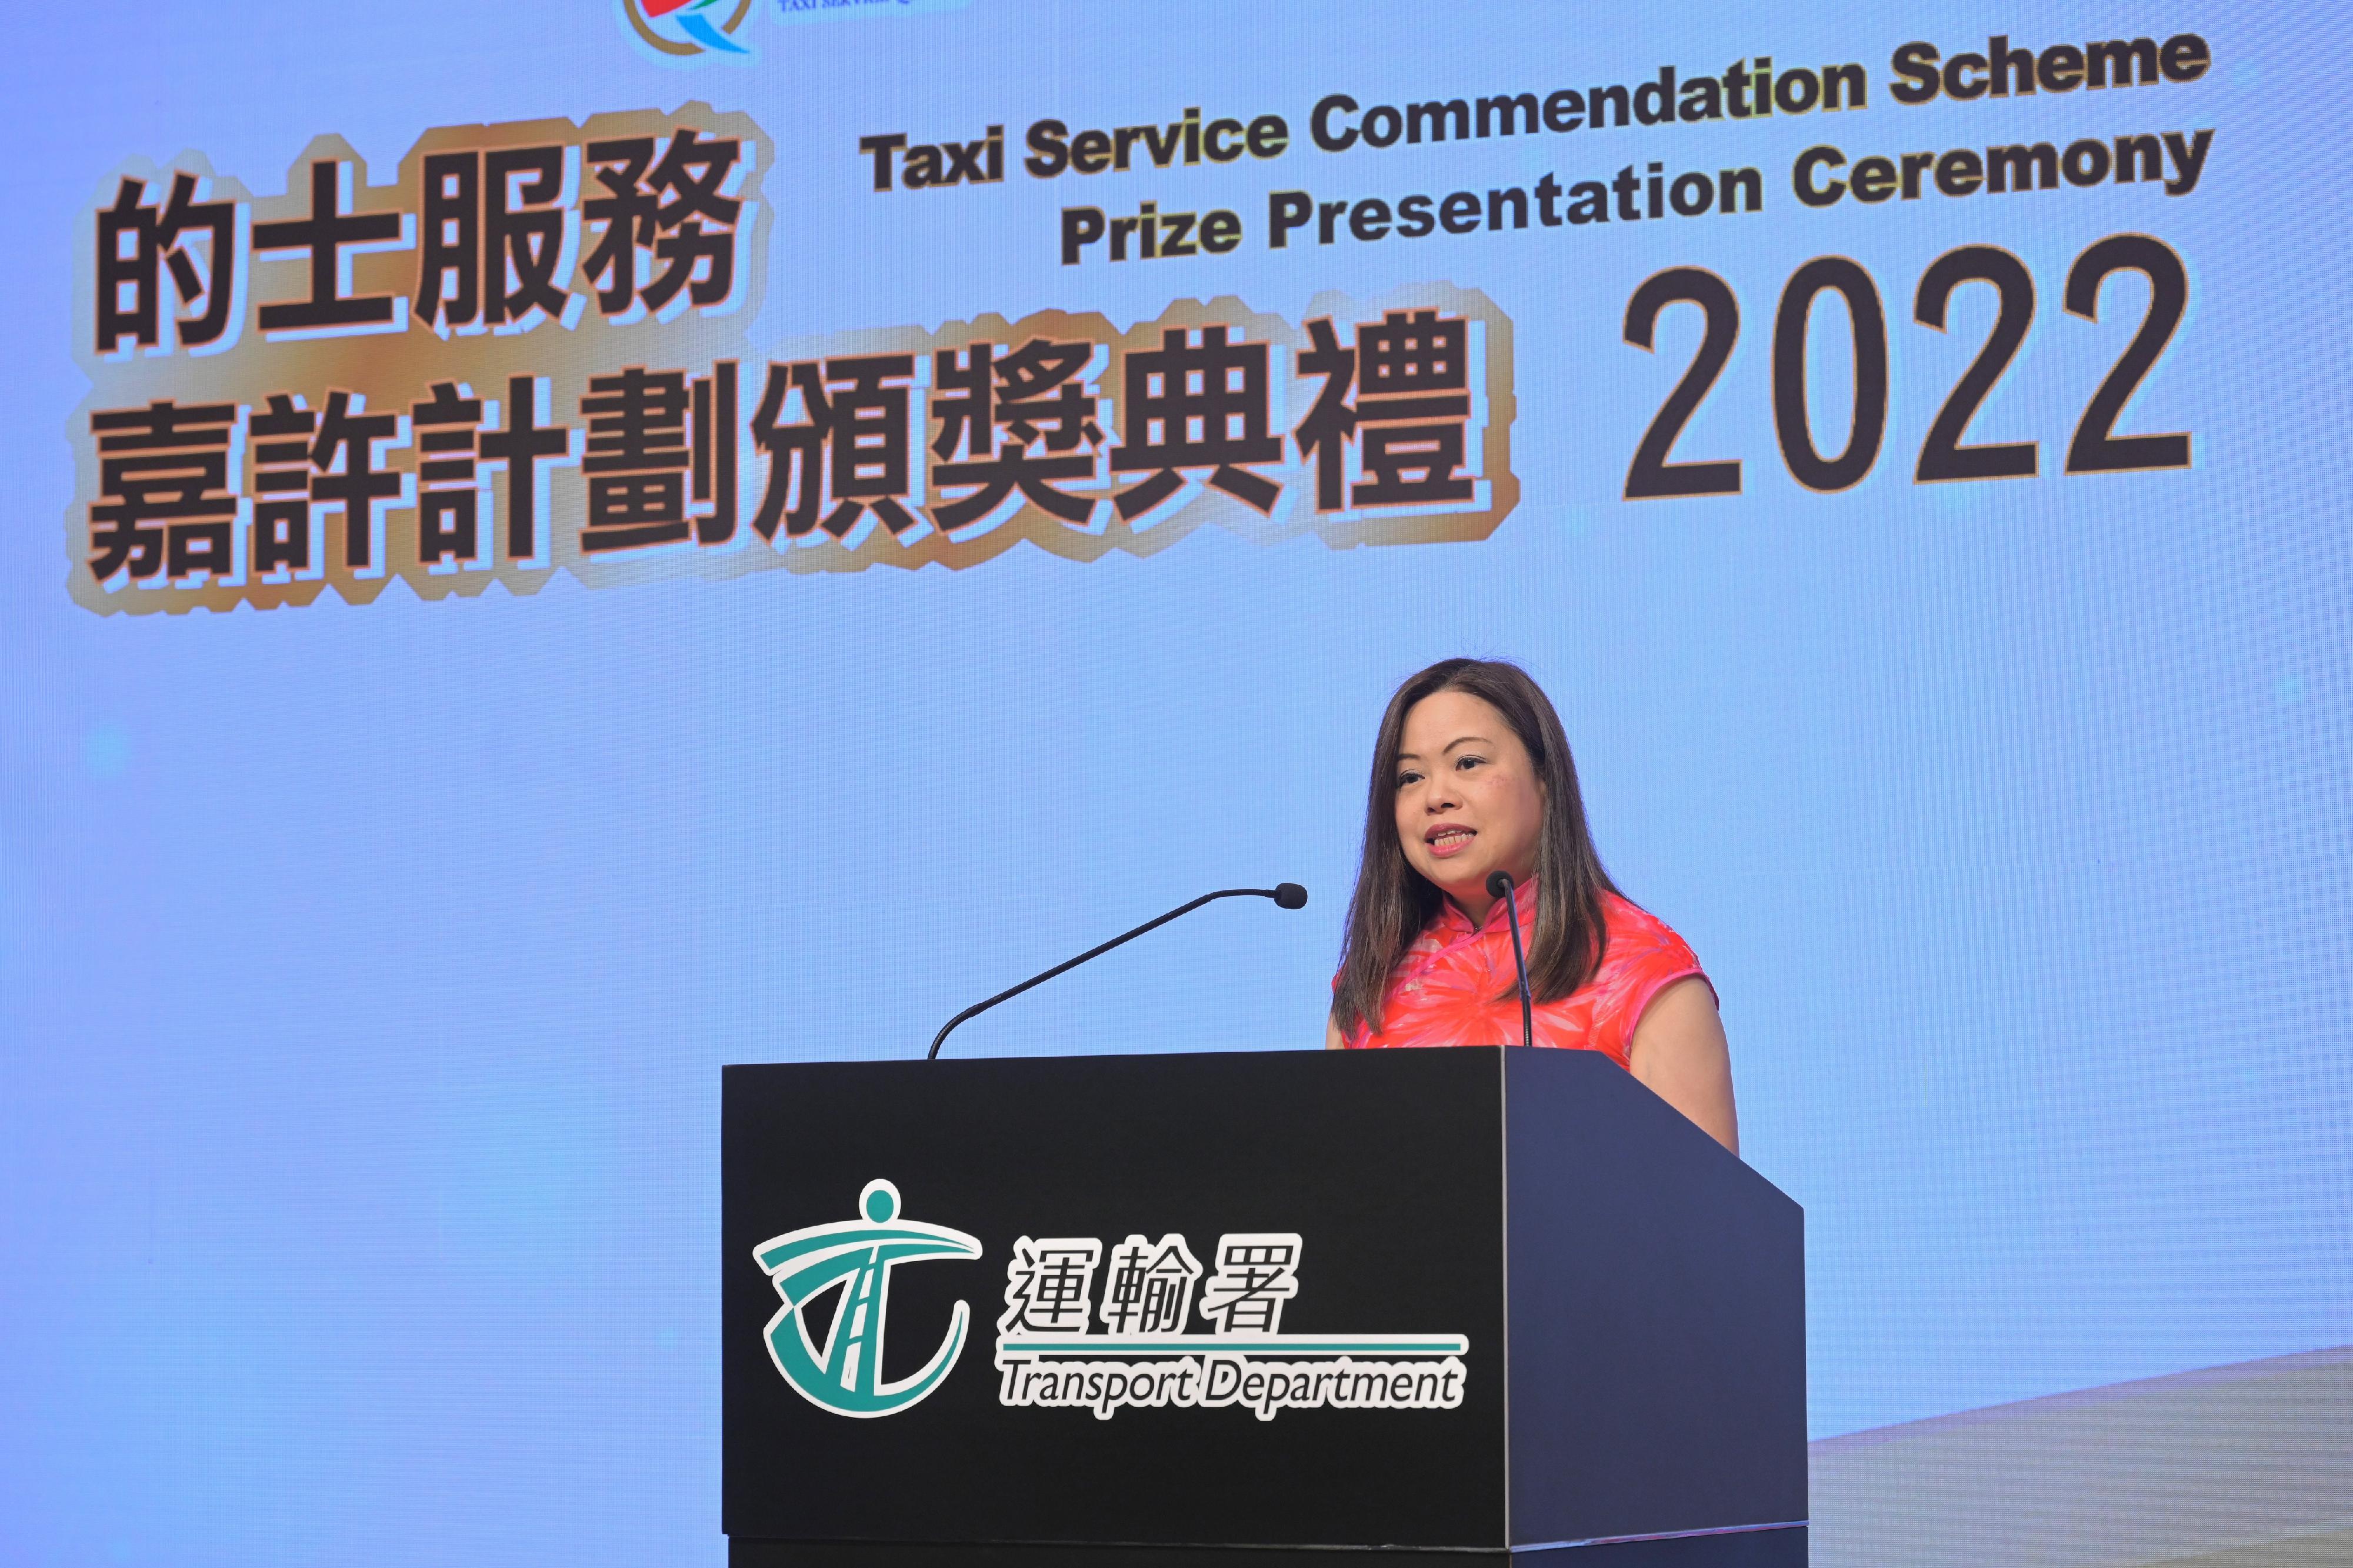 The prize presentation ceremony for the Taxi Service Commendation Scheme 2022, jointly organised by the Committee on Taxi Service Quality (CTSQ) and the Transport Department, was held today (July 14). Speaking at the prize presentation ceremony, the CTSQ Chairman and Commissioner for Transport, Miss Rosanna Law, said she is pleased to observe the continued rise in the participation rate of the Scheme by taxi drivers and the general public, which indicated that the public is in support of appreciating taxi drivers and management teams providing quality services. She encourages taxi drivers and passengers to continue to promote good conduct and performance of the trade. 